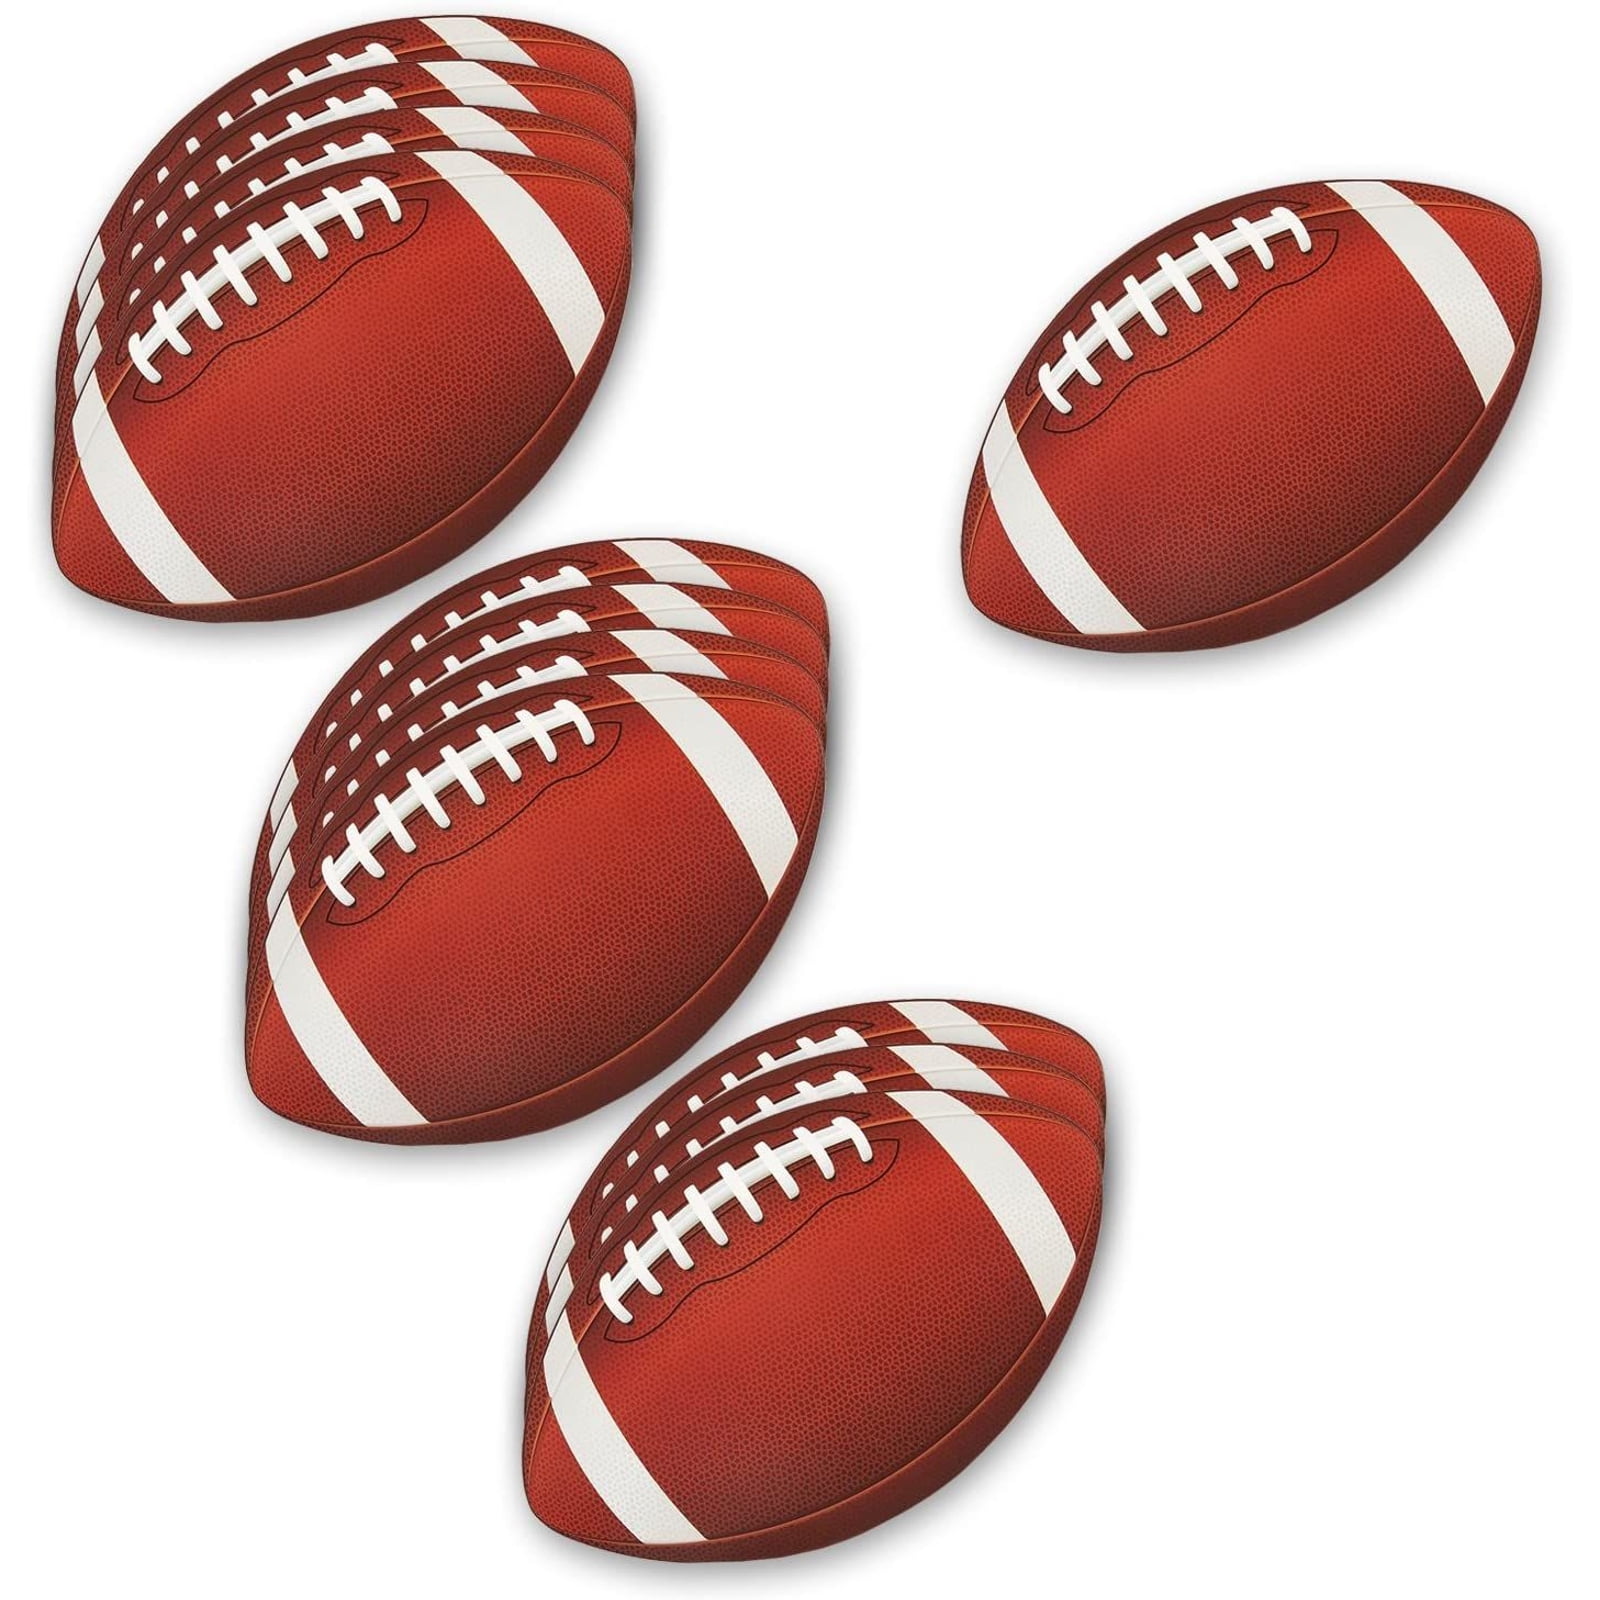 12-Pack Football Cutouts Cutouts for Sports Themed Celebrations, Football Party Decorations, Tailgate Supplies, 13 X 8 inches - Walmart.com